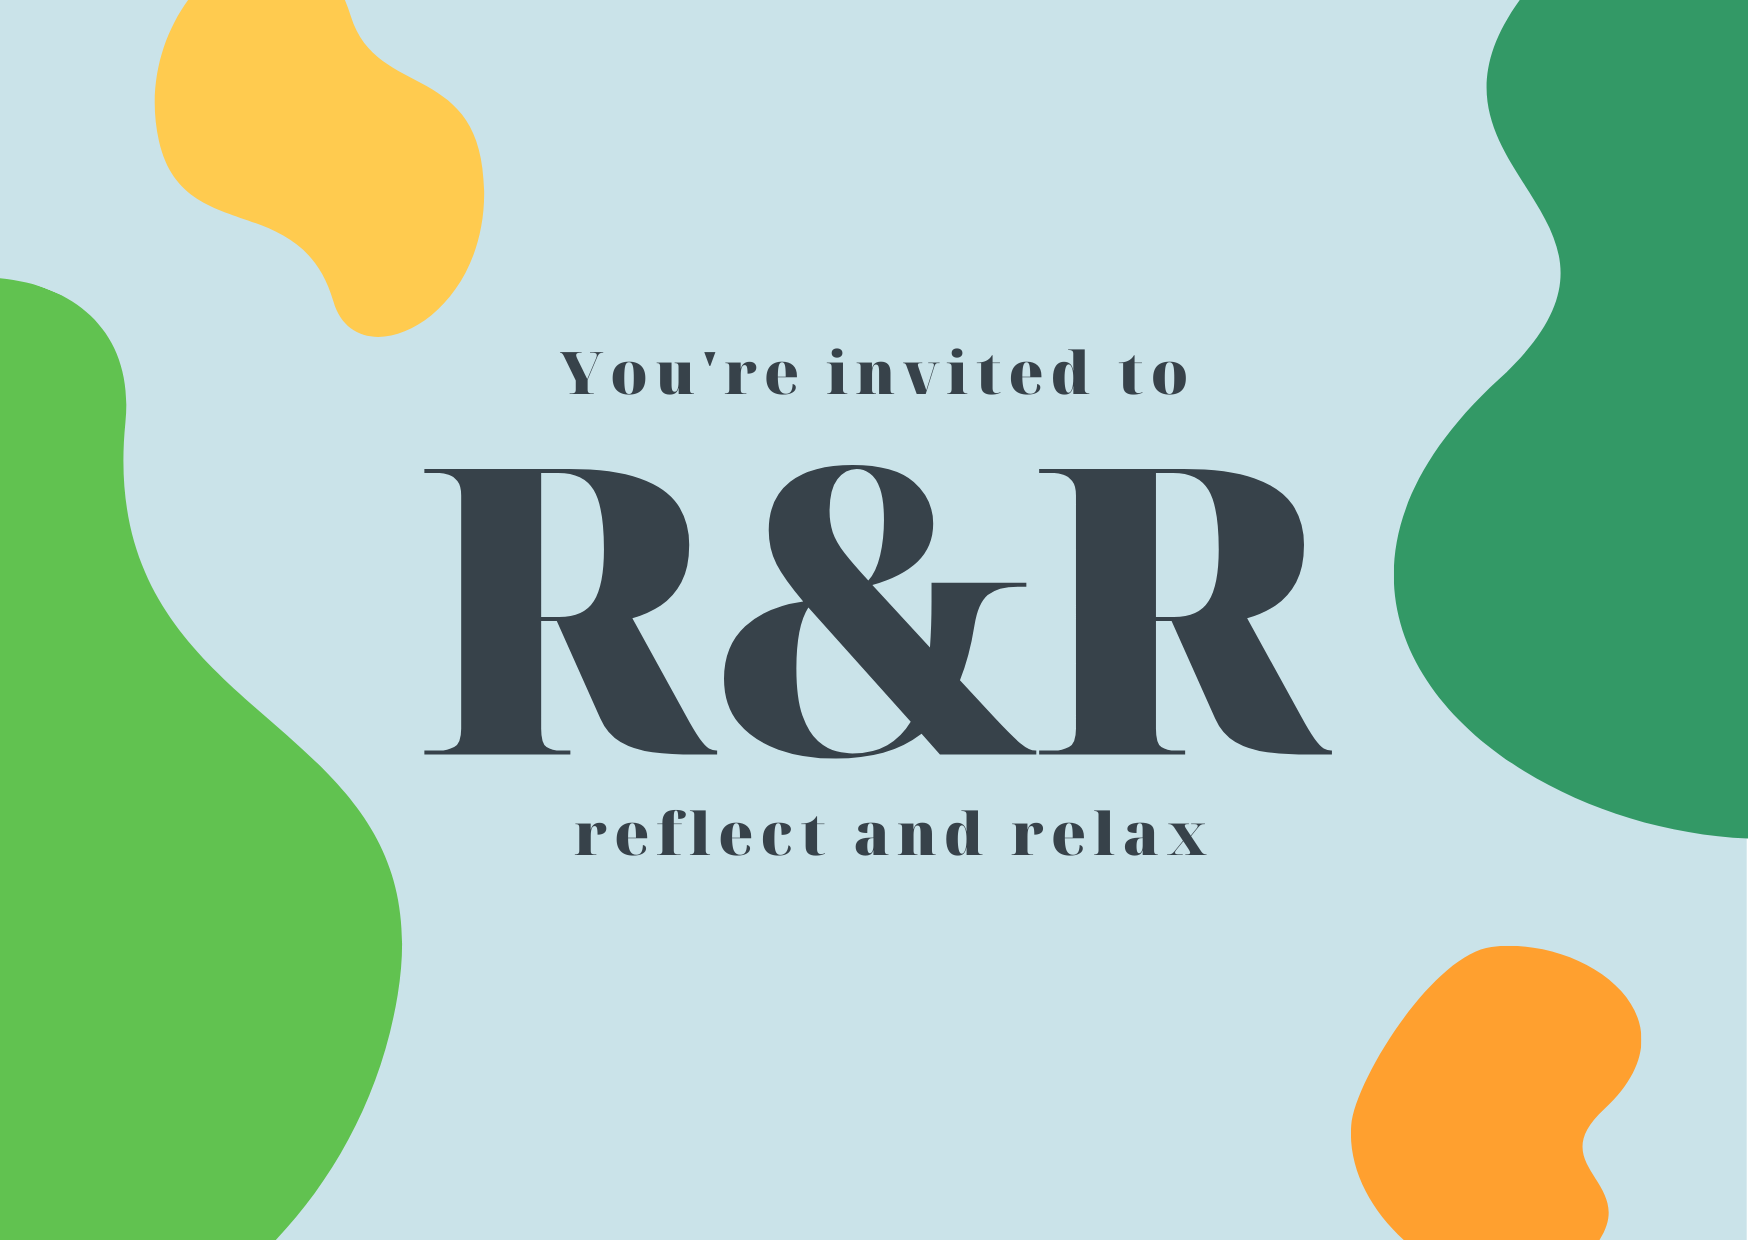 You're invited to reflect and relax.